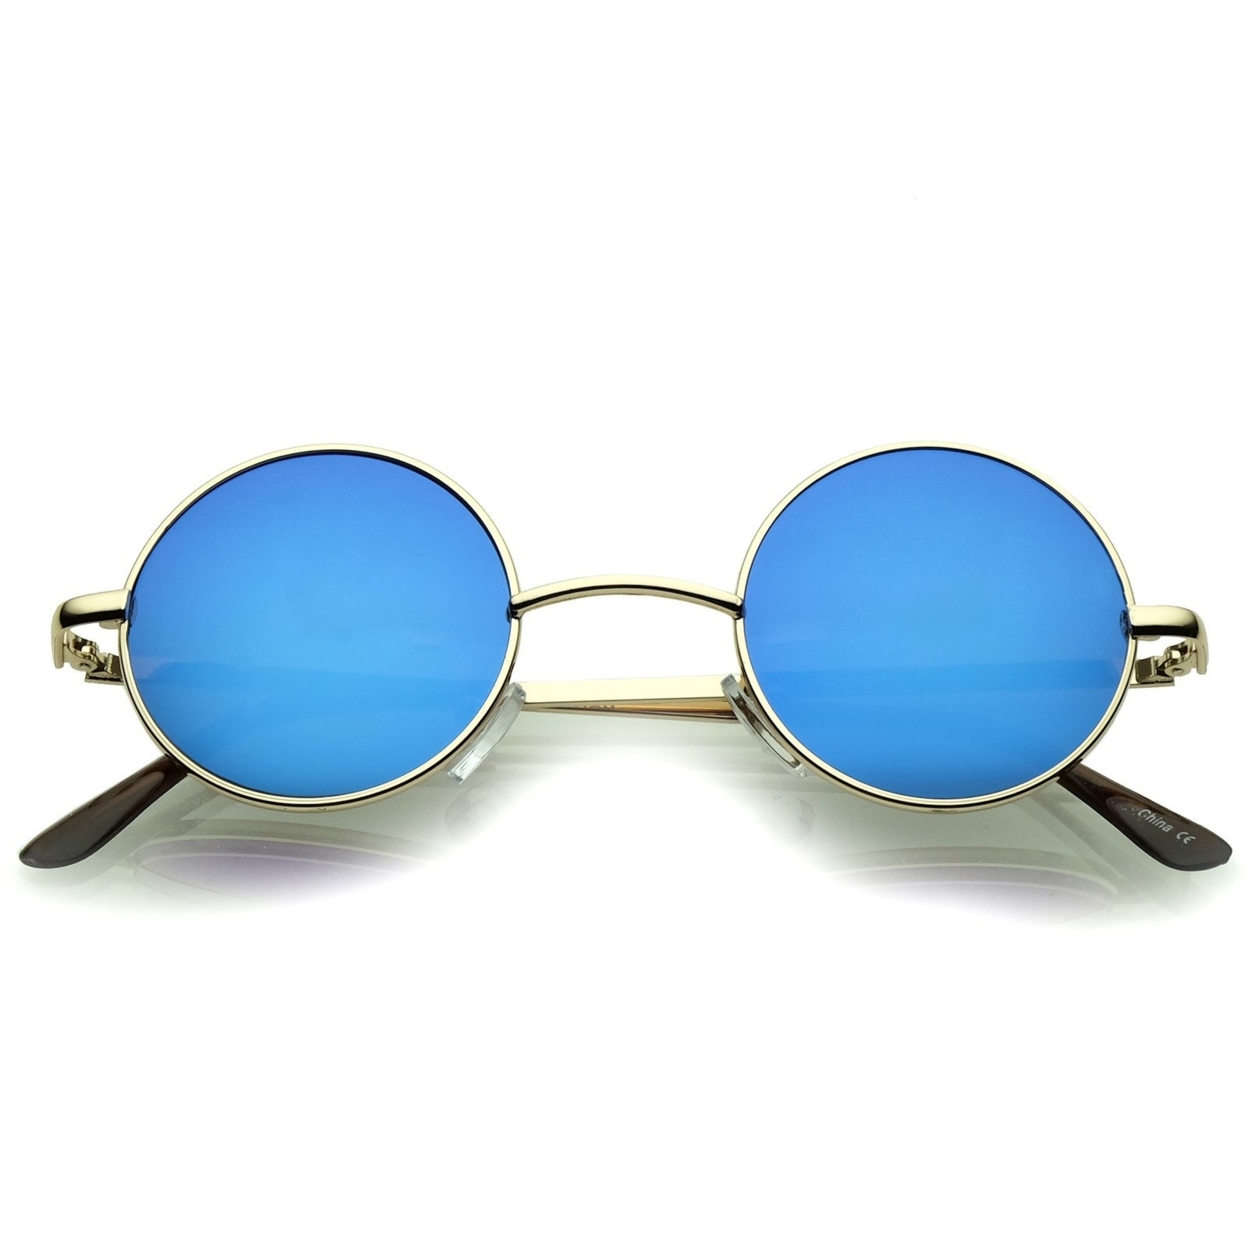 Small Retro Lennon Inspired Style Colored Mirror Lens Round Metal Sunglasses 41mm - Gold / Green-Blue Mirror